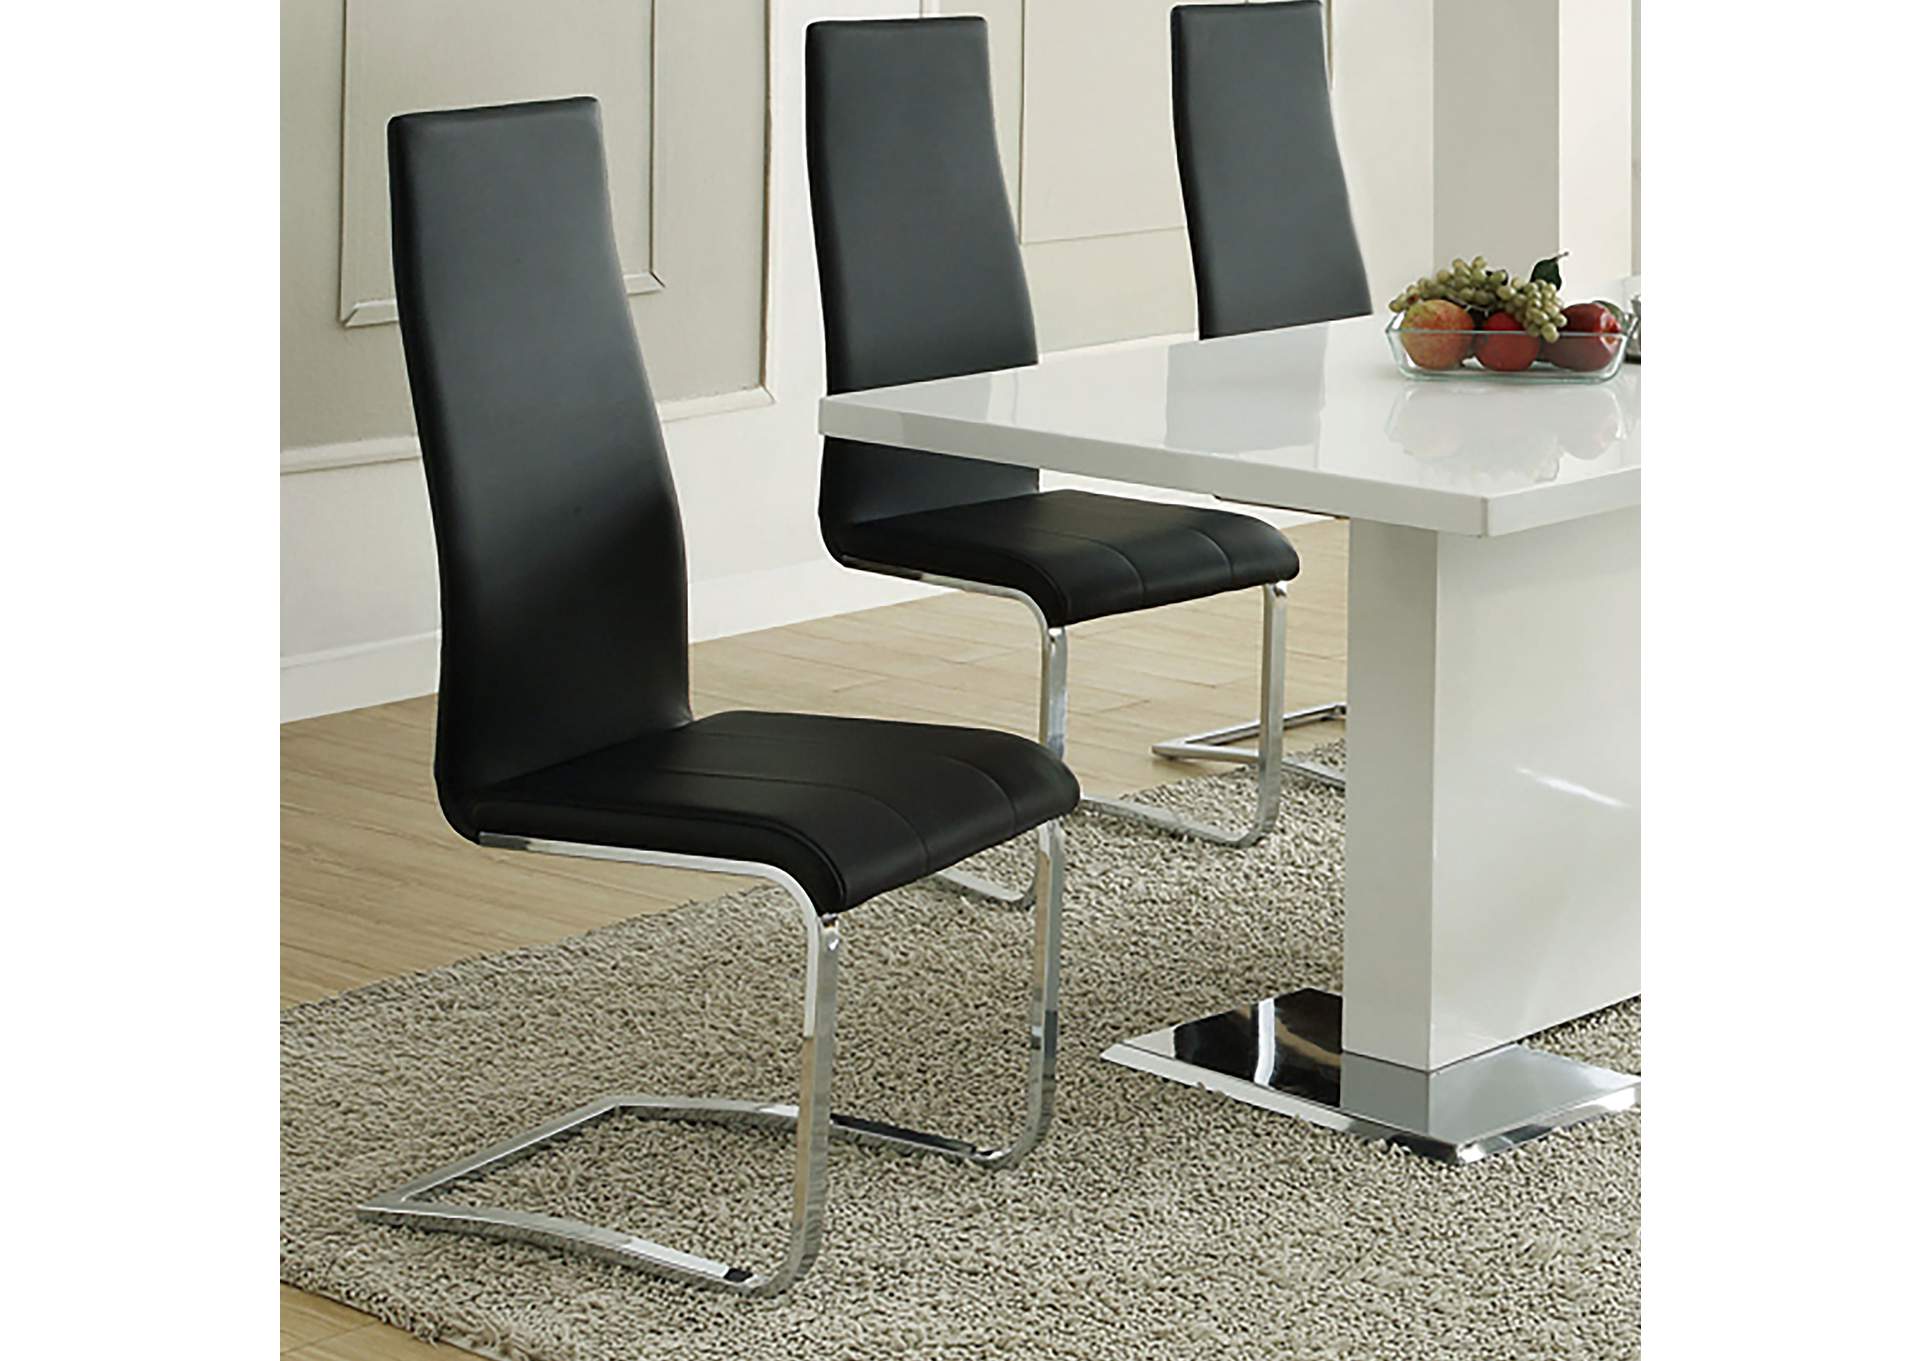 Montclair High Back Dining Chairs Black and Chrome (Set of 4),Coaster Furniture